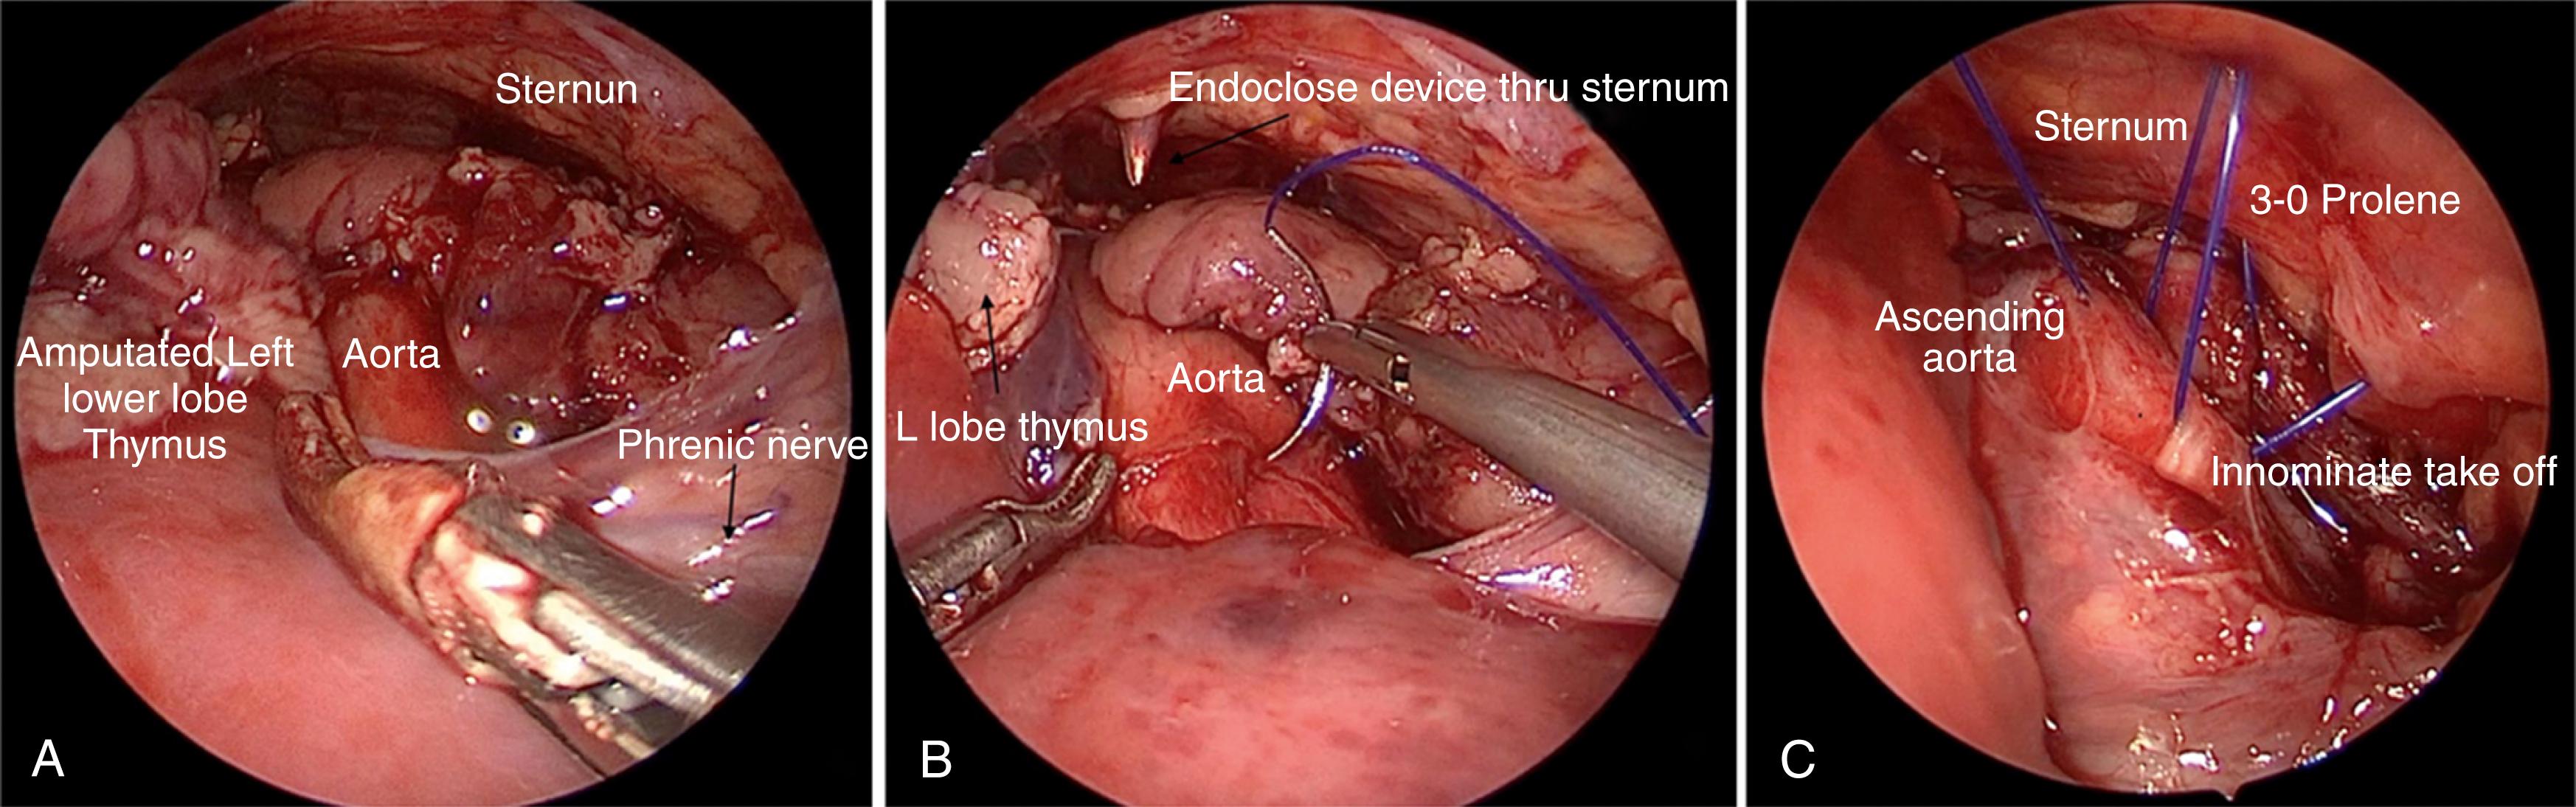 Fig. 38-5, A, The aortic arch and takeoff of the innominate artery are seen with the left lobe of the thymus mobilized. B, The initial stitch (3-0 polydioxanone) is being placed on the ascending aorta near the pericardial reflection. The Endo-Close device will be used to pull the suture up through the sternum. C, The three sutures on the aortic wall have now been placed and exteriorized. Tension will be applied to all three sutures as they are being tied. Tracheobronchoscopy will be performed to ensure an effective aortopexy.